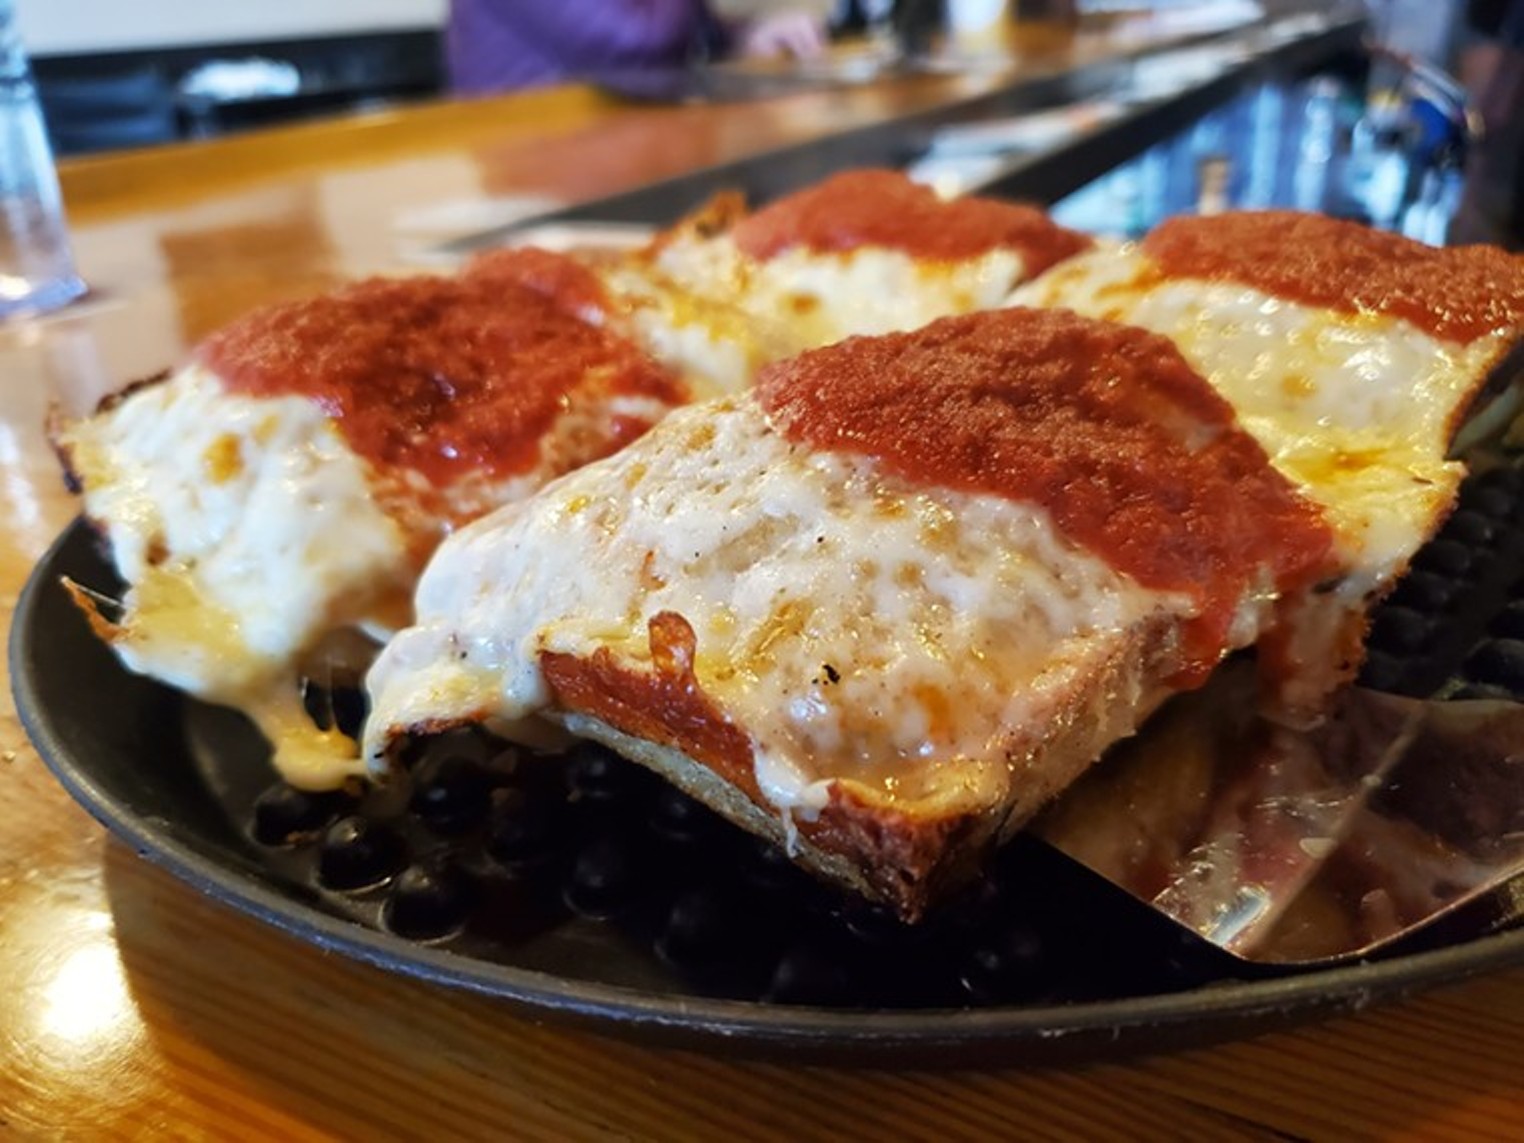 Best Vegan Pizza 2019 Hops and Pie Best of Denver® Best Restaurants, Bars, Clubs, Music and Stores in Denver Westword photo